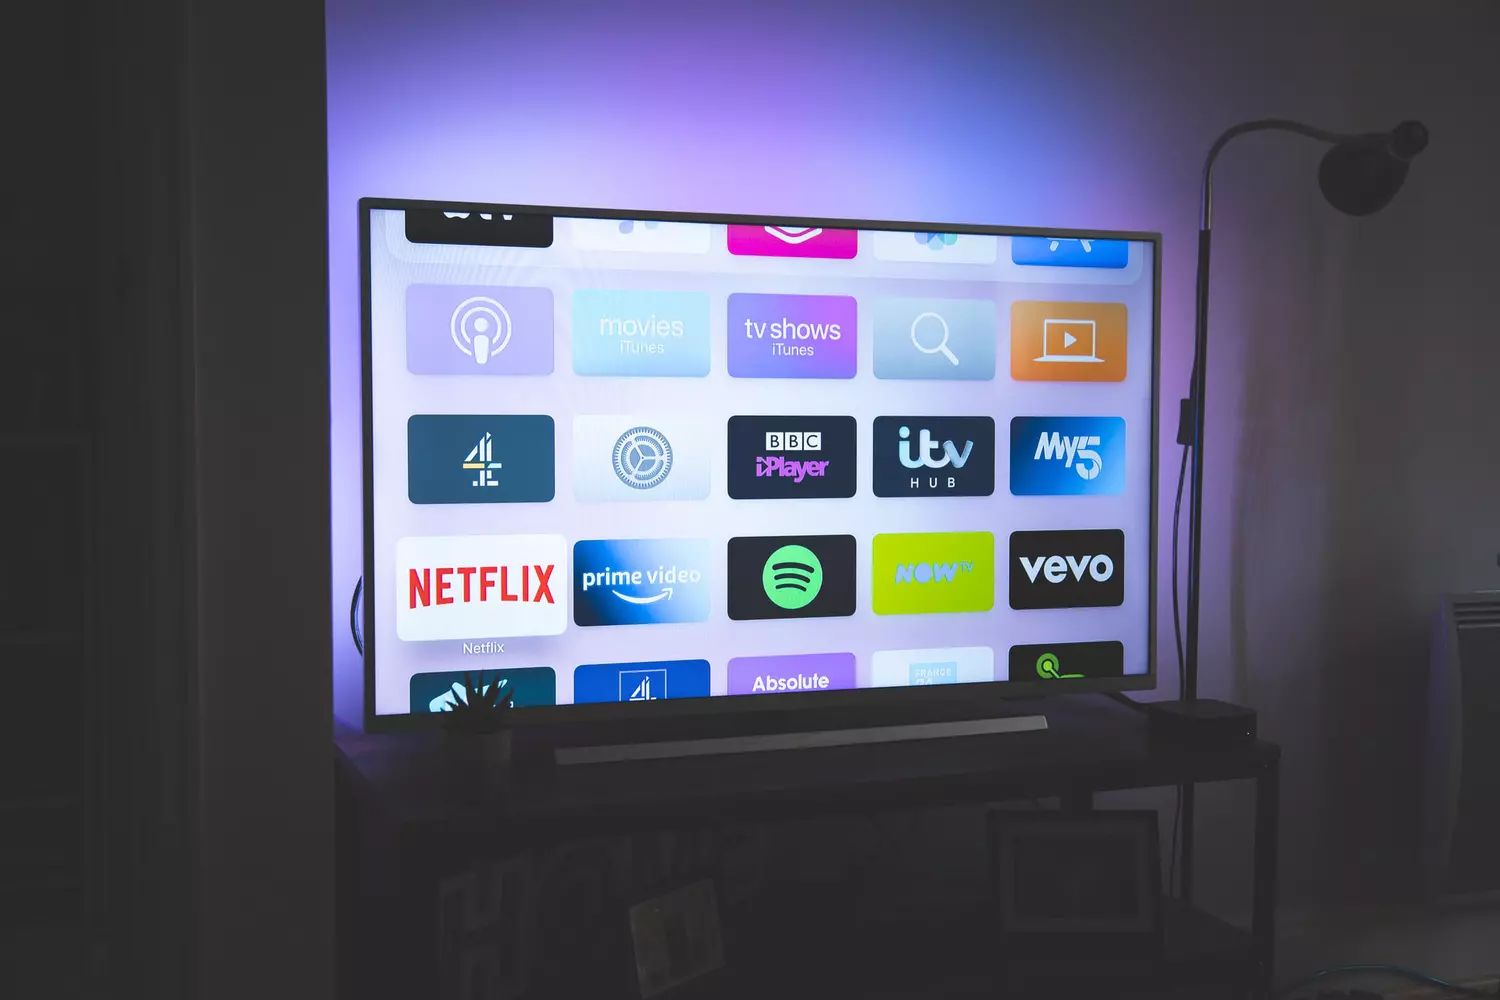 How To Update The Browser On LG OLED TV